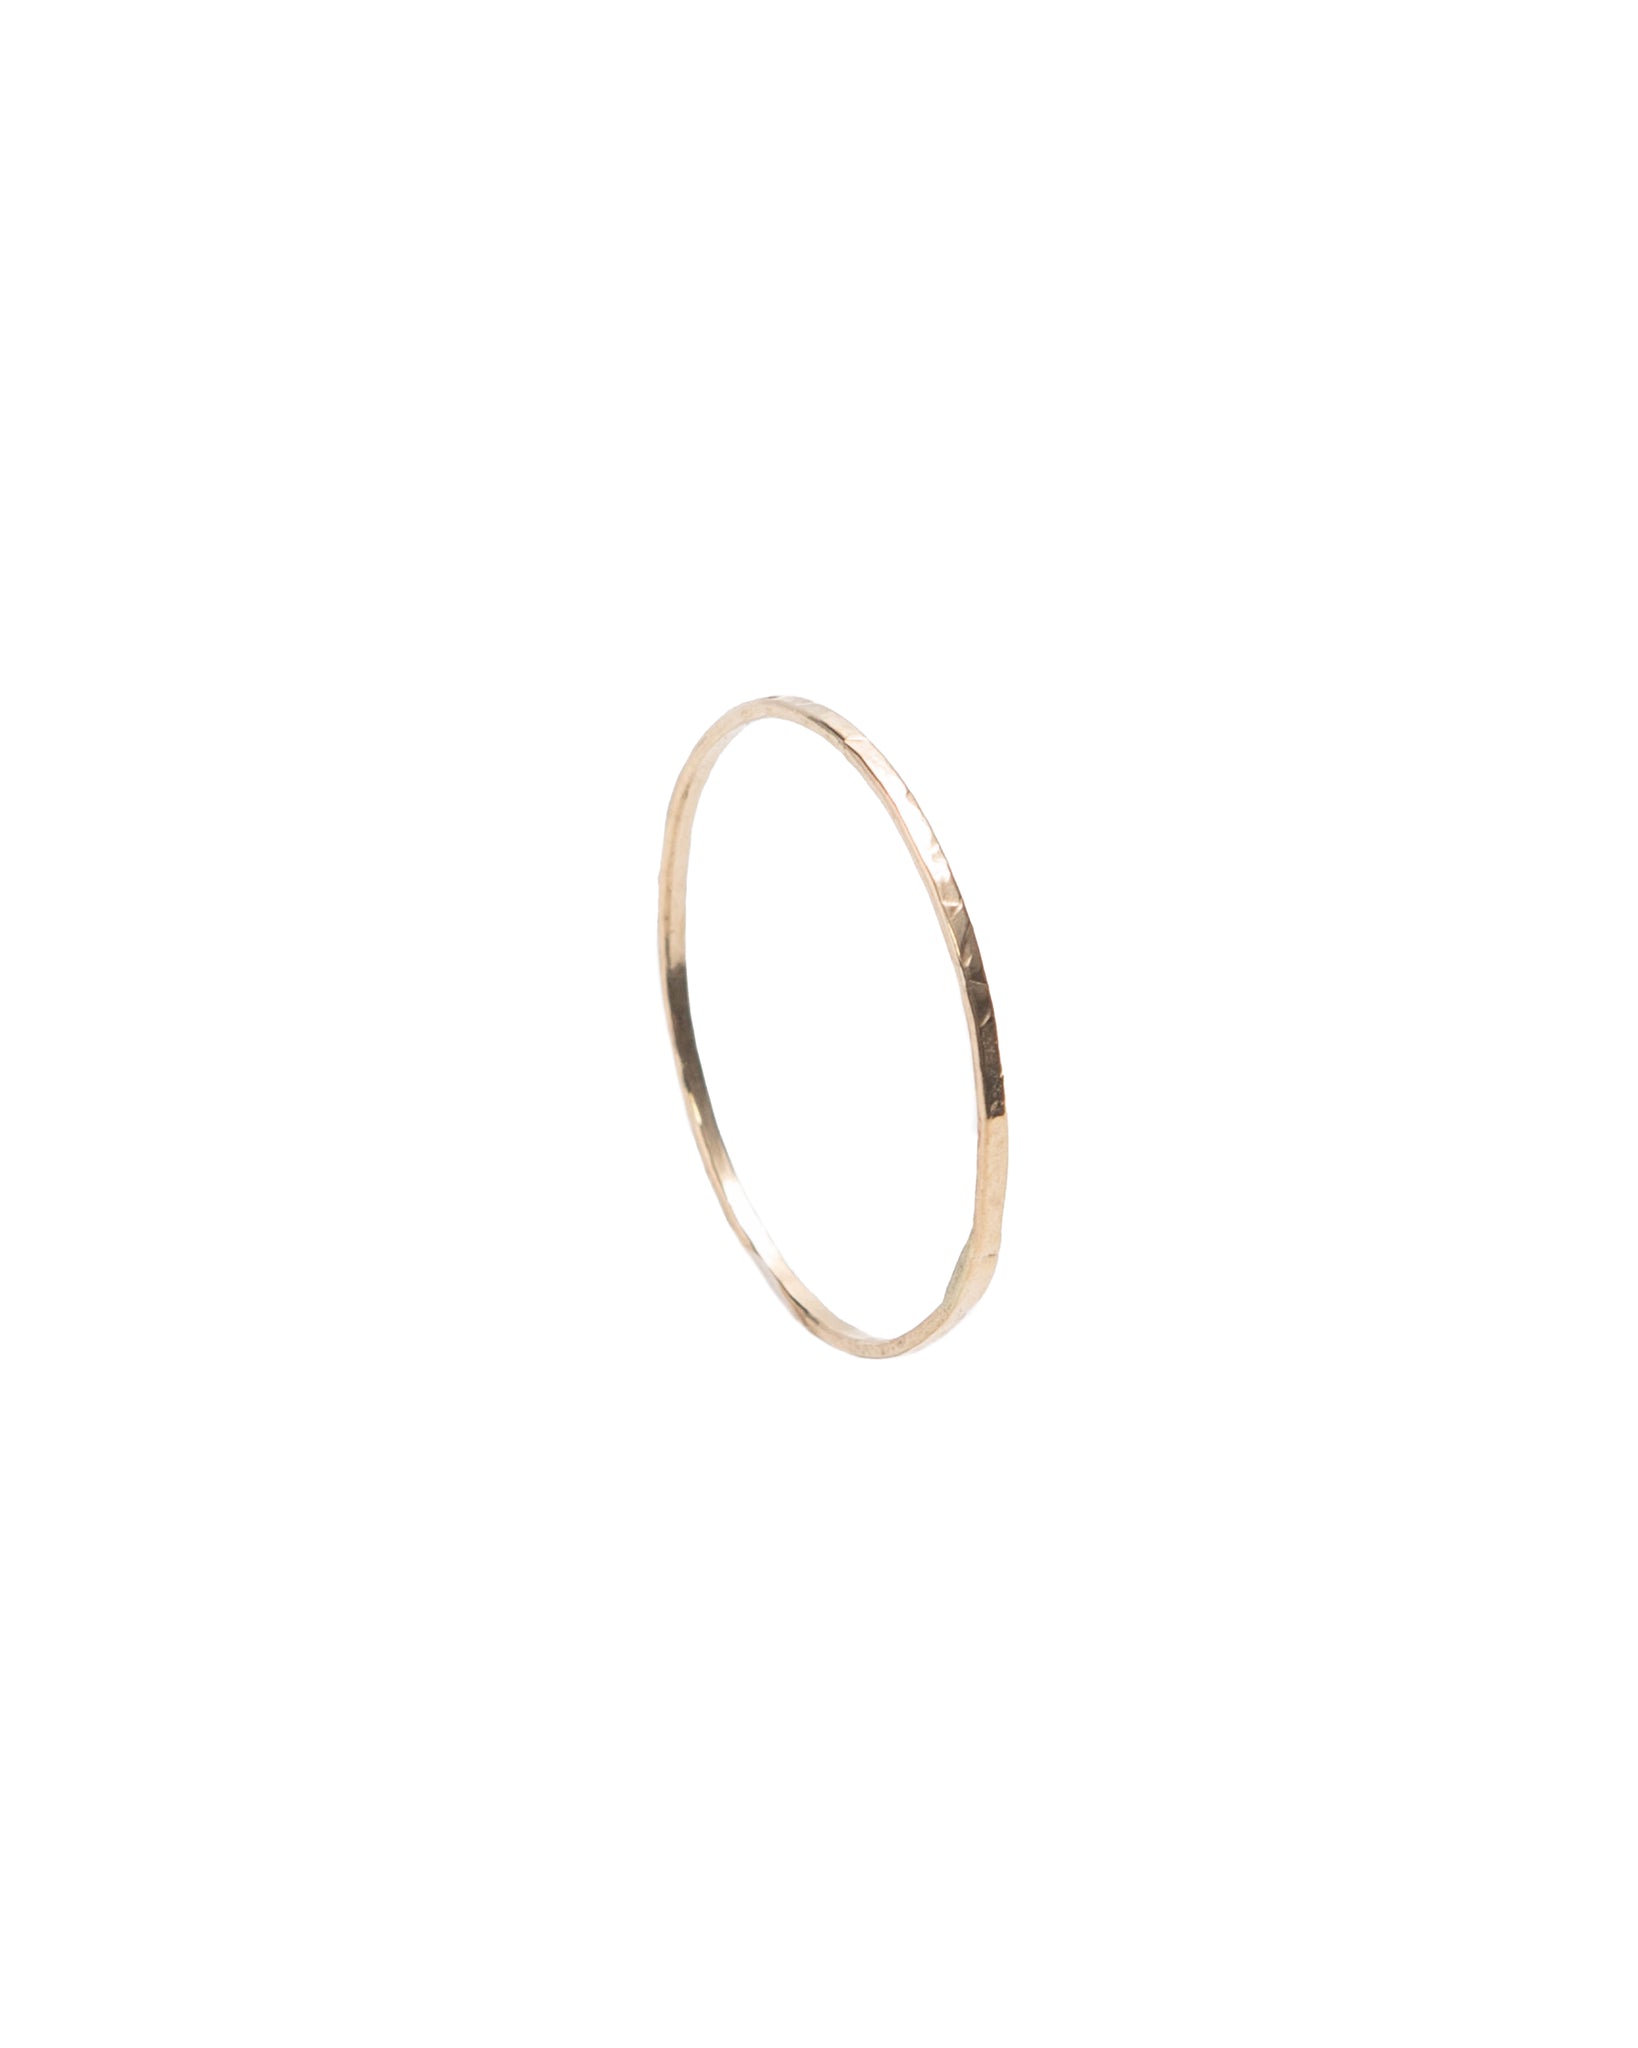 Barely There 14K Gold Hammered Stacking Ring